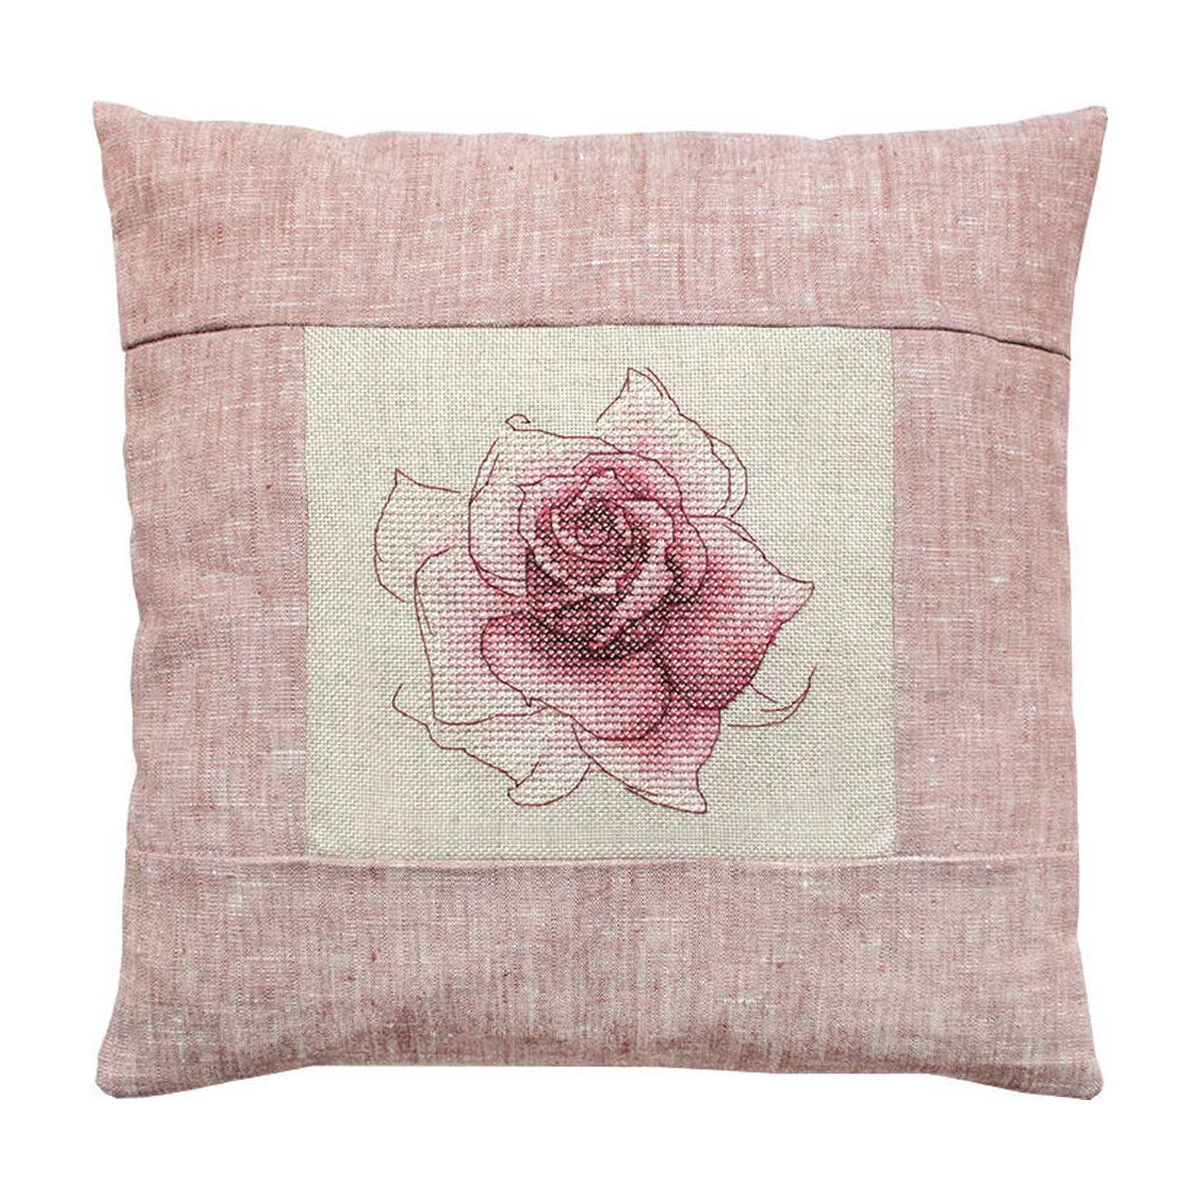 A square cushion made from textured pink fabric. In the...